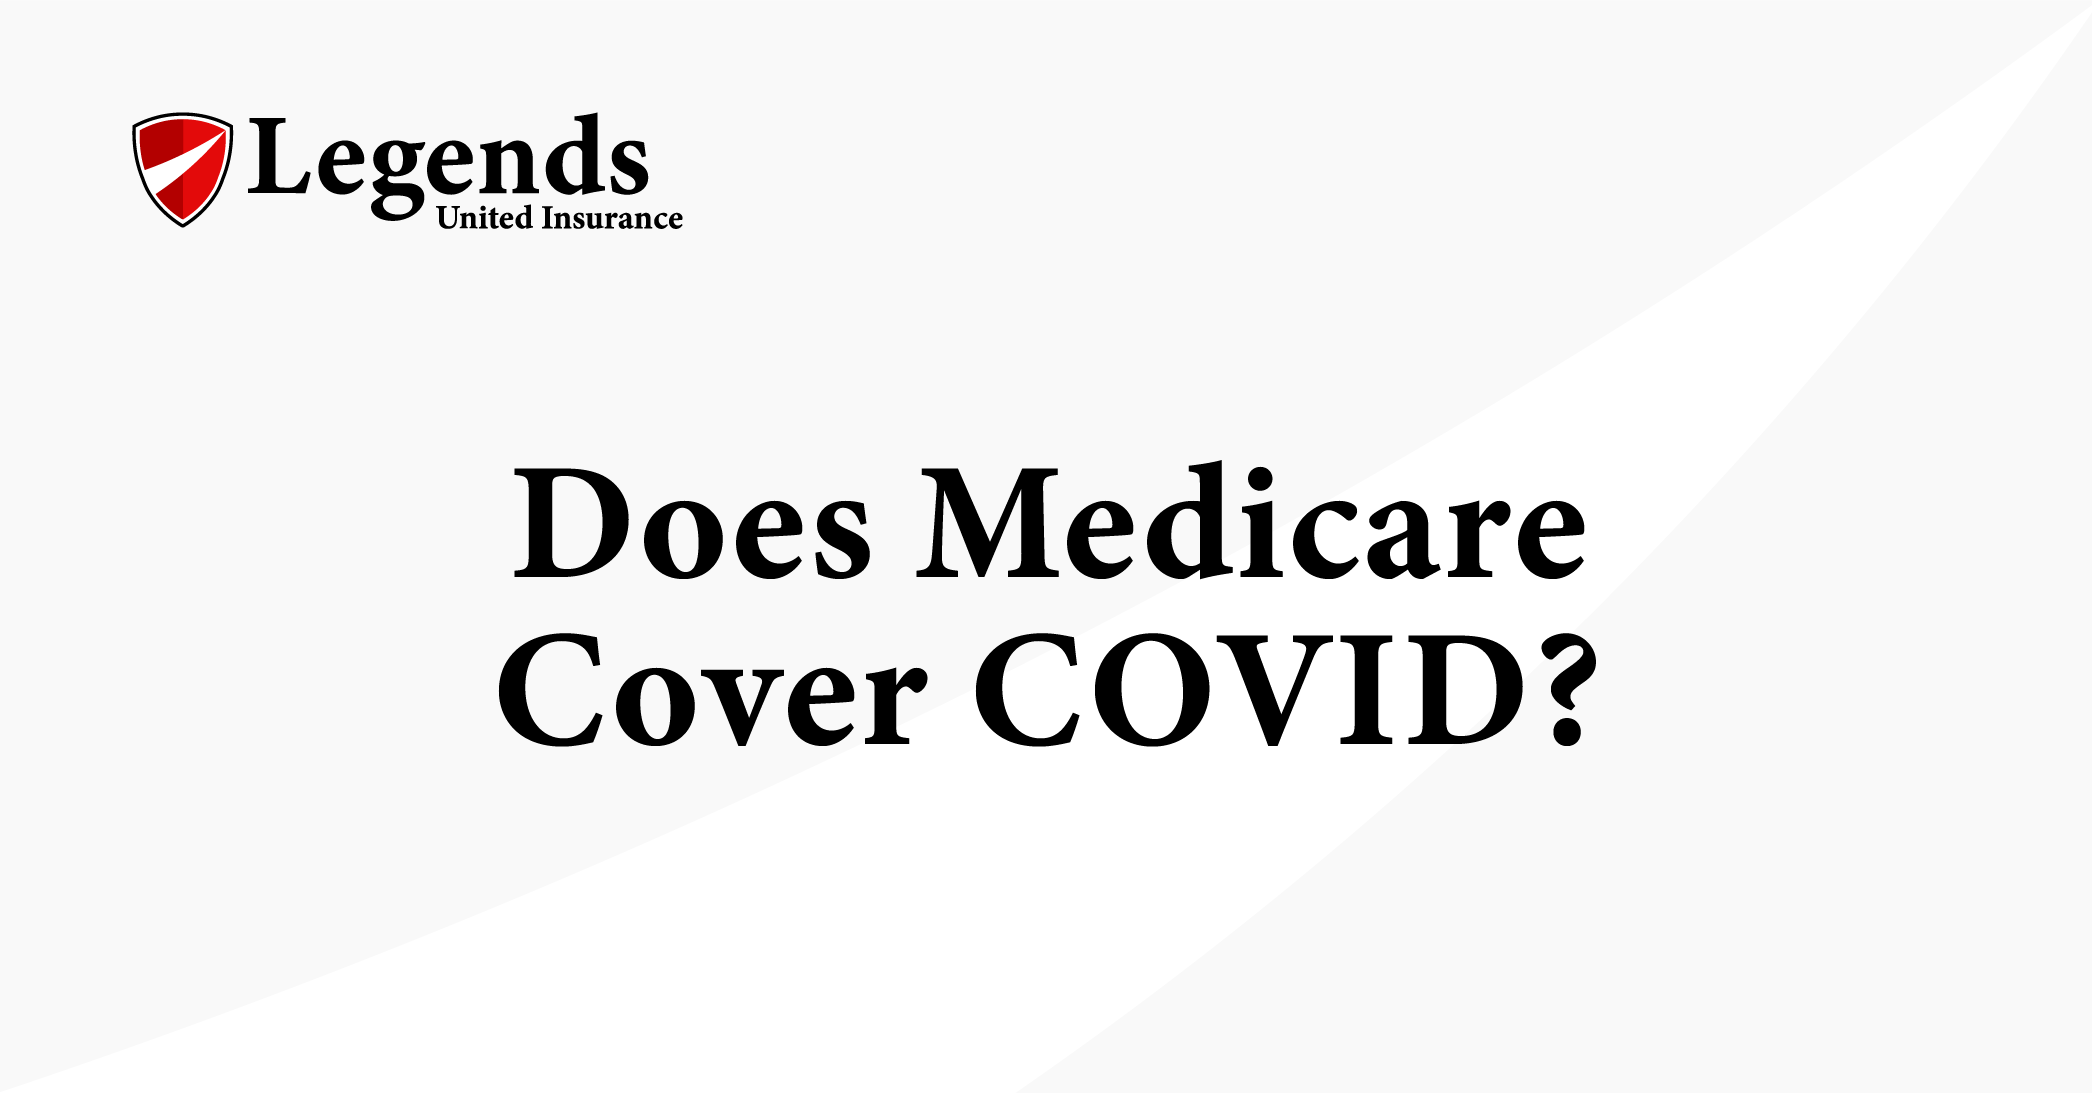 If you have Medicare insurance, you may be wondering – does Medicare cover COVID? Here’s what you need to know about testing, vaccines, telehealth, COVID treatment and more.